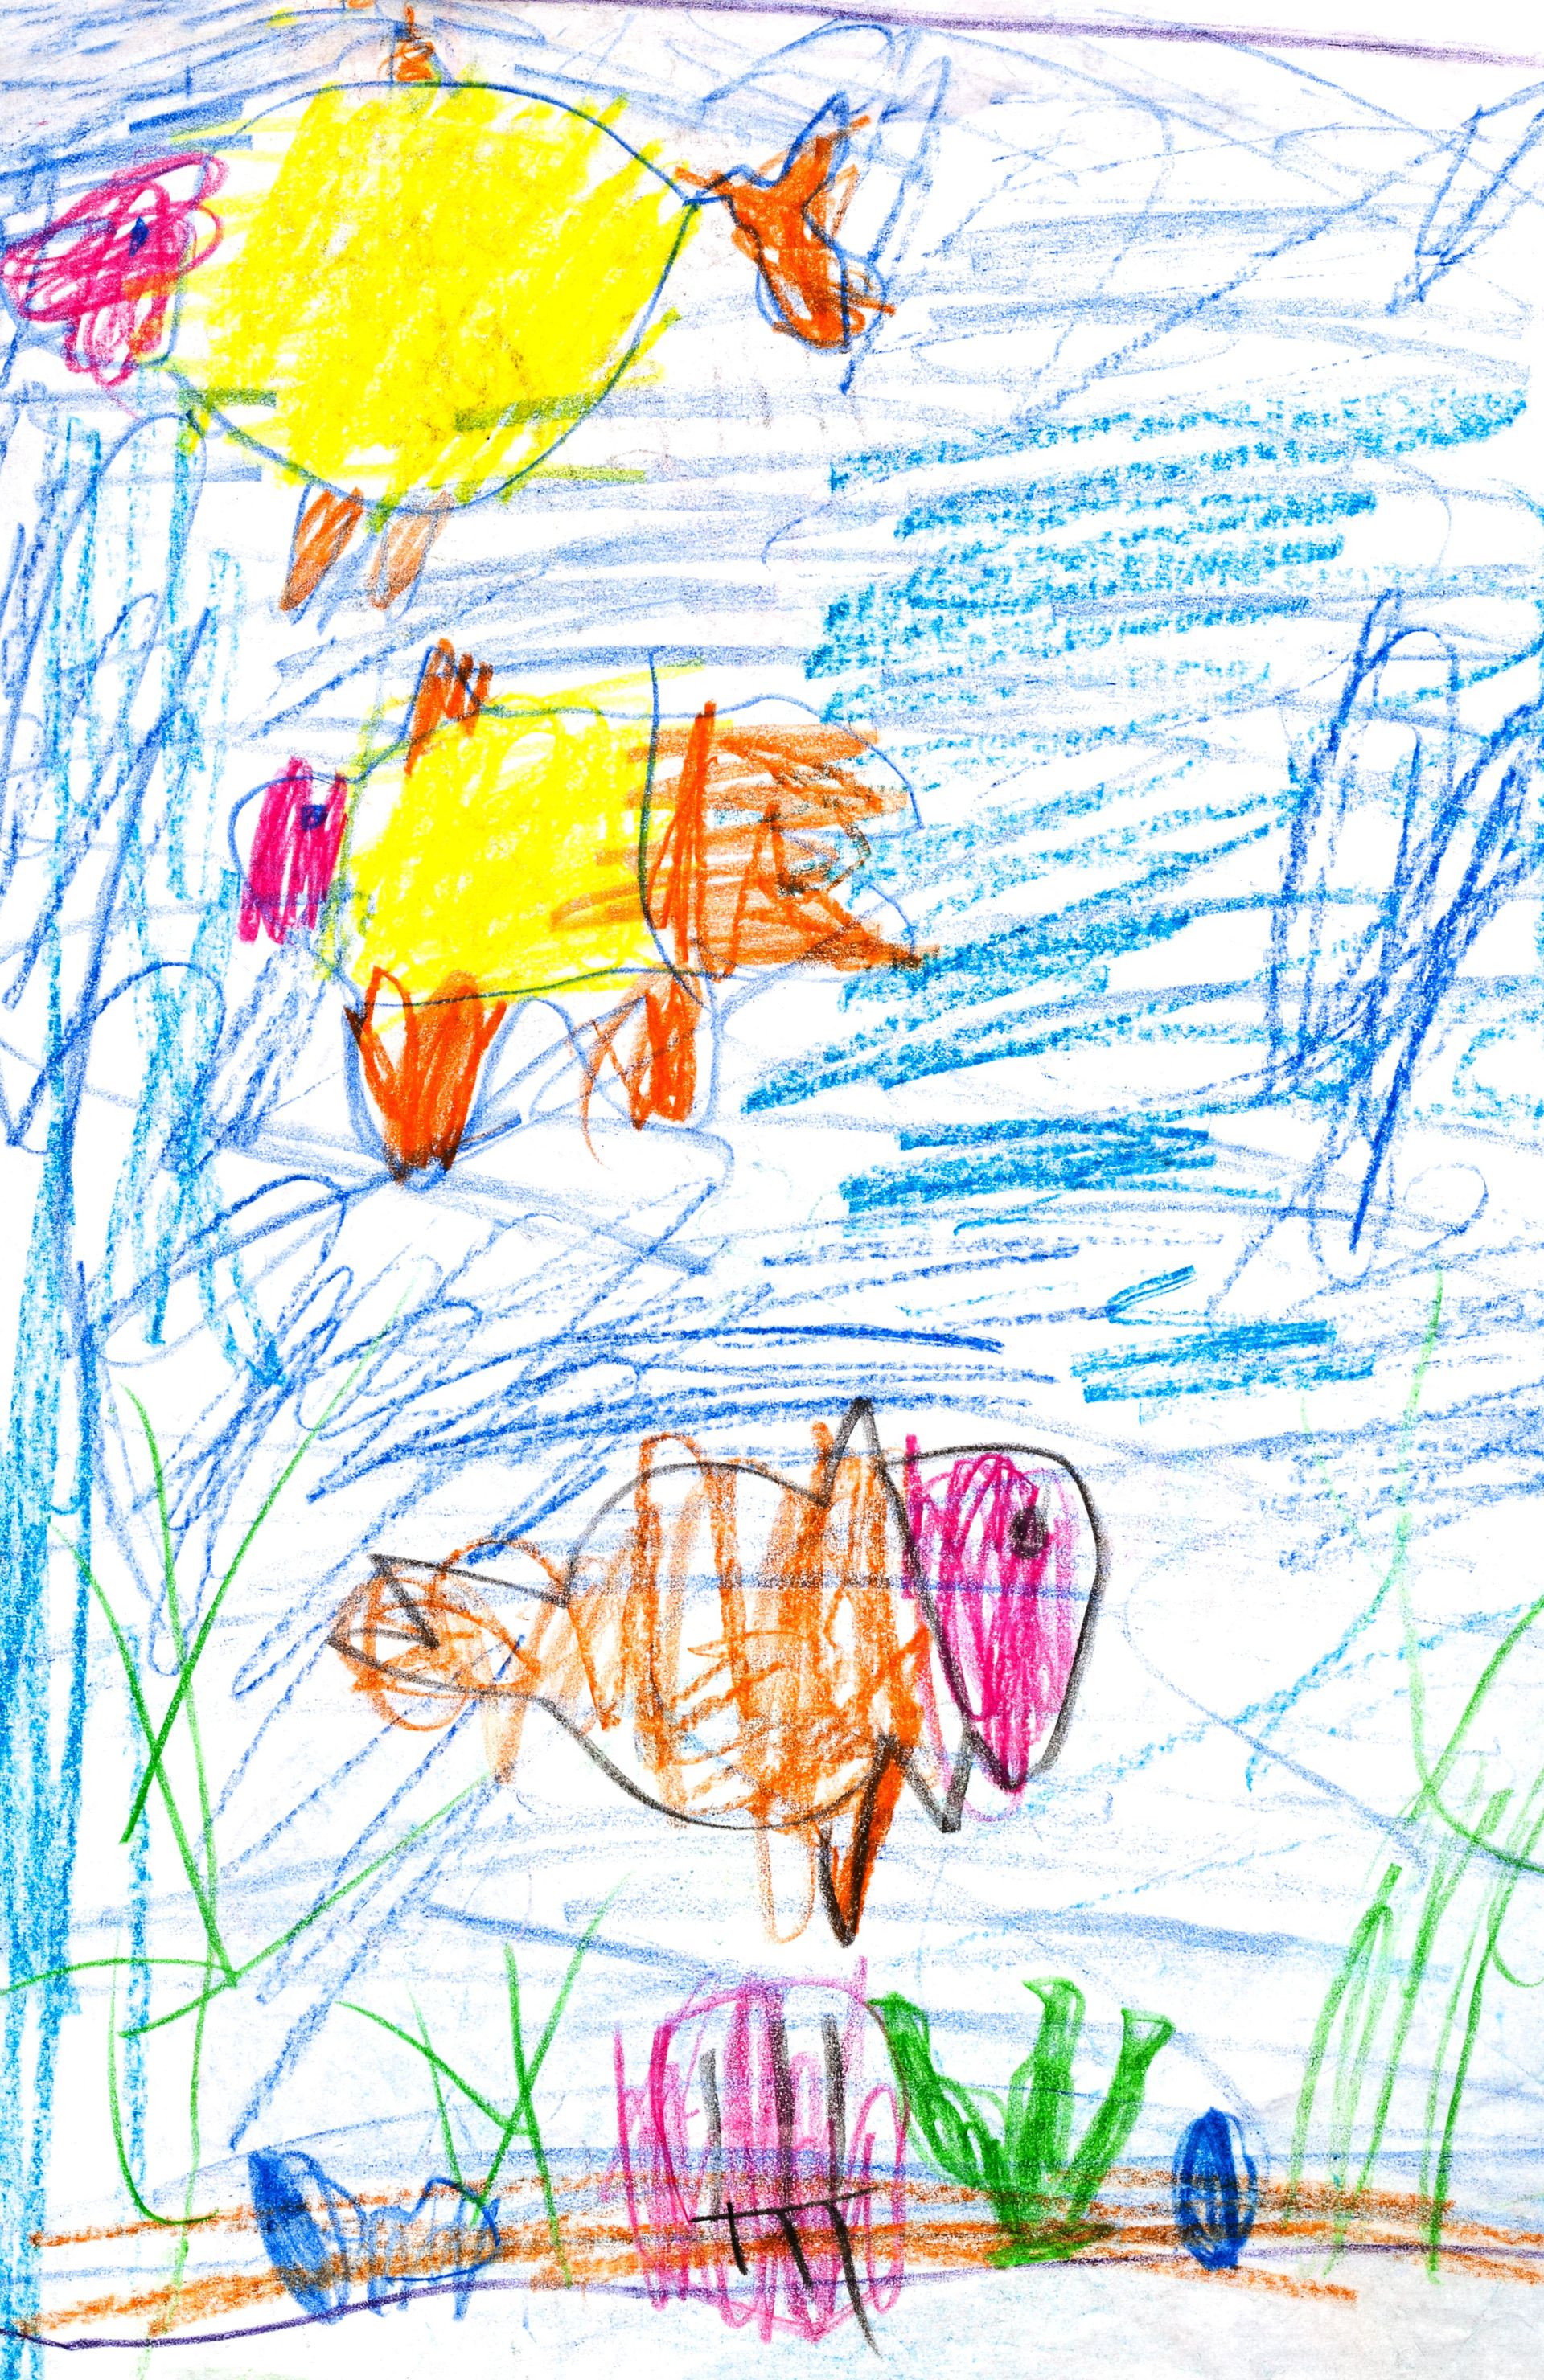 Children's crayon drawing of fish under the sea